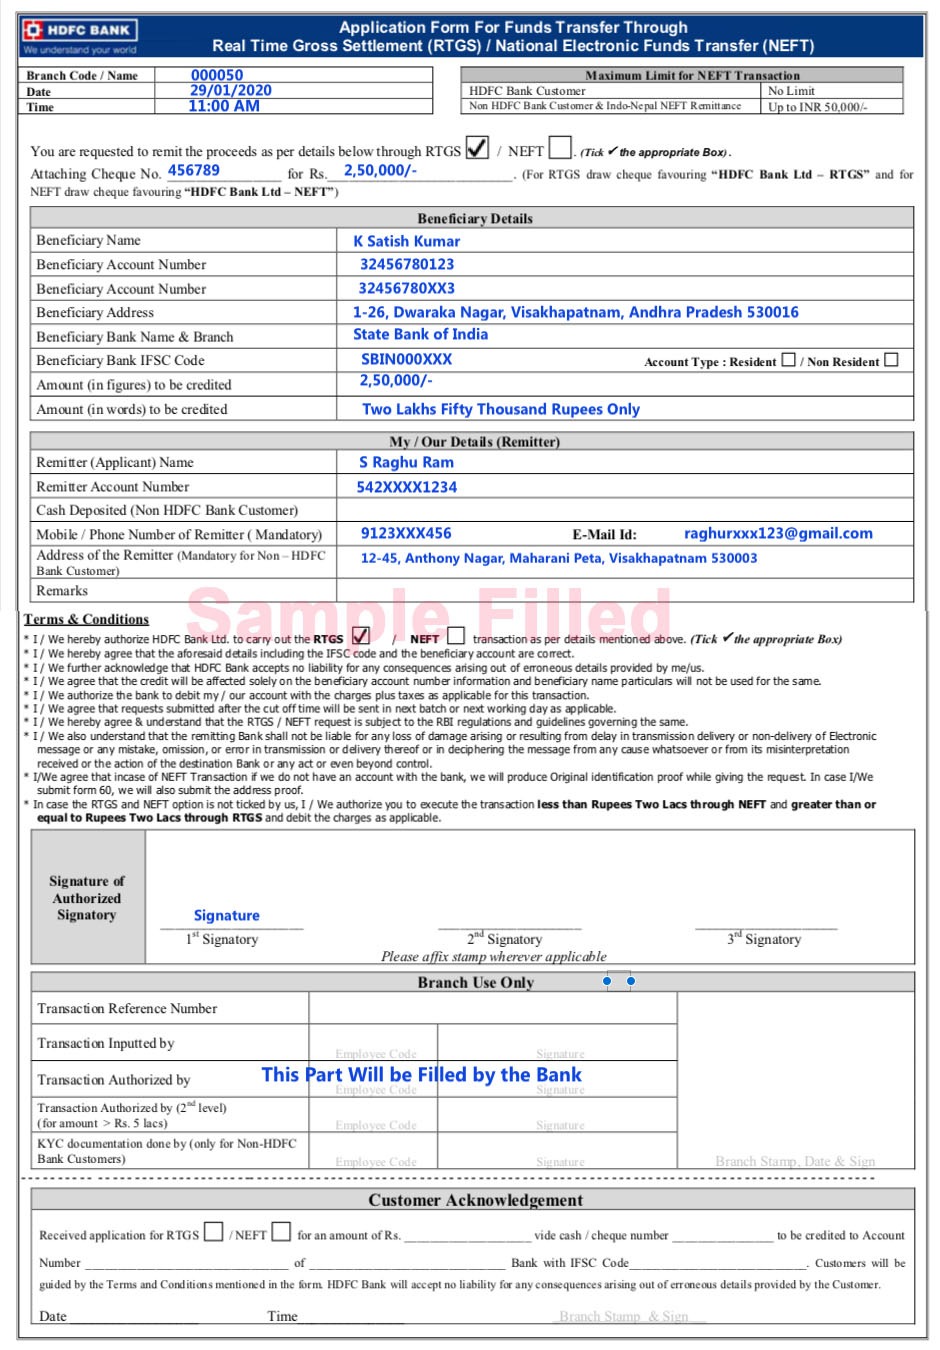 HDFC RTGS form filling sample